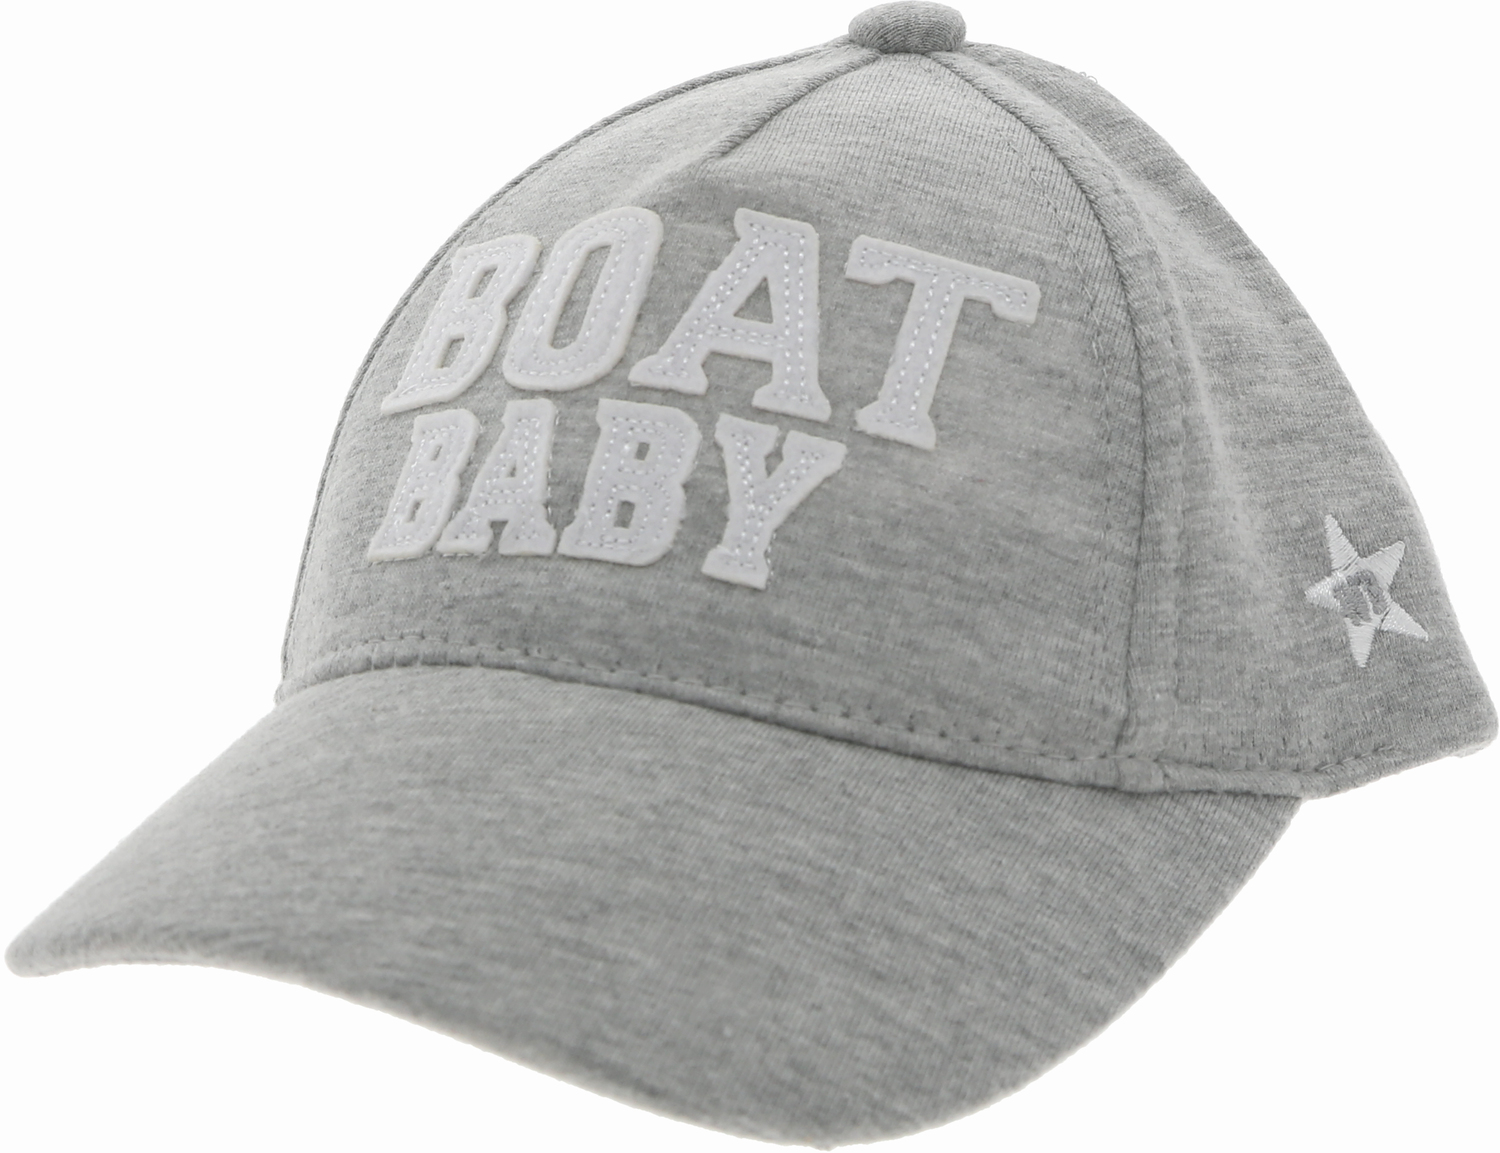 Boat by We Baby - Boat - Adjustable Toddler Hat
(0-12 Months)